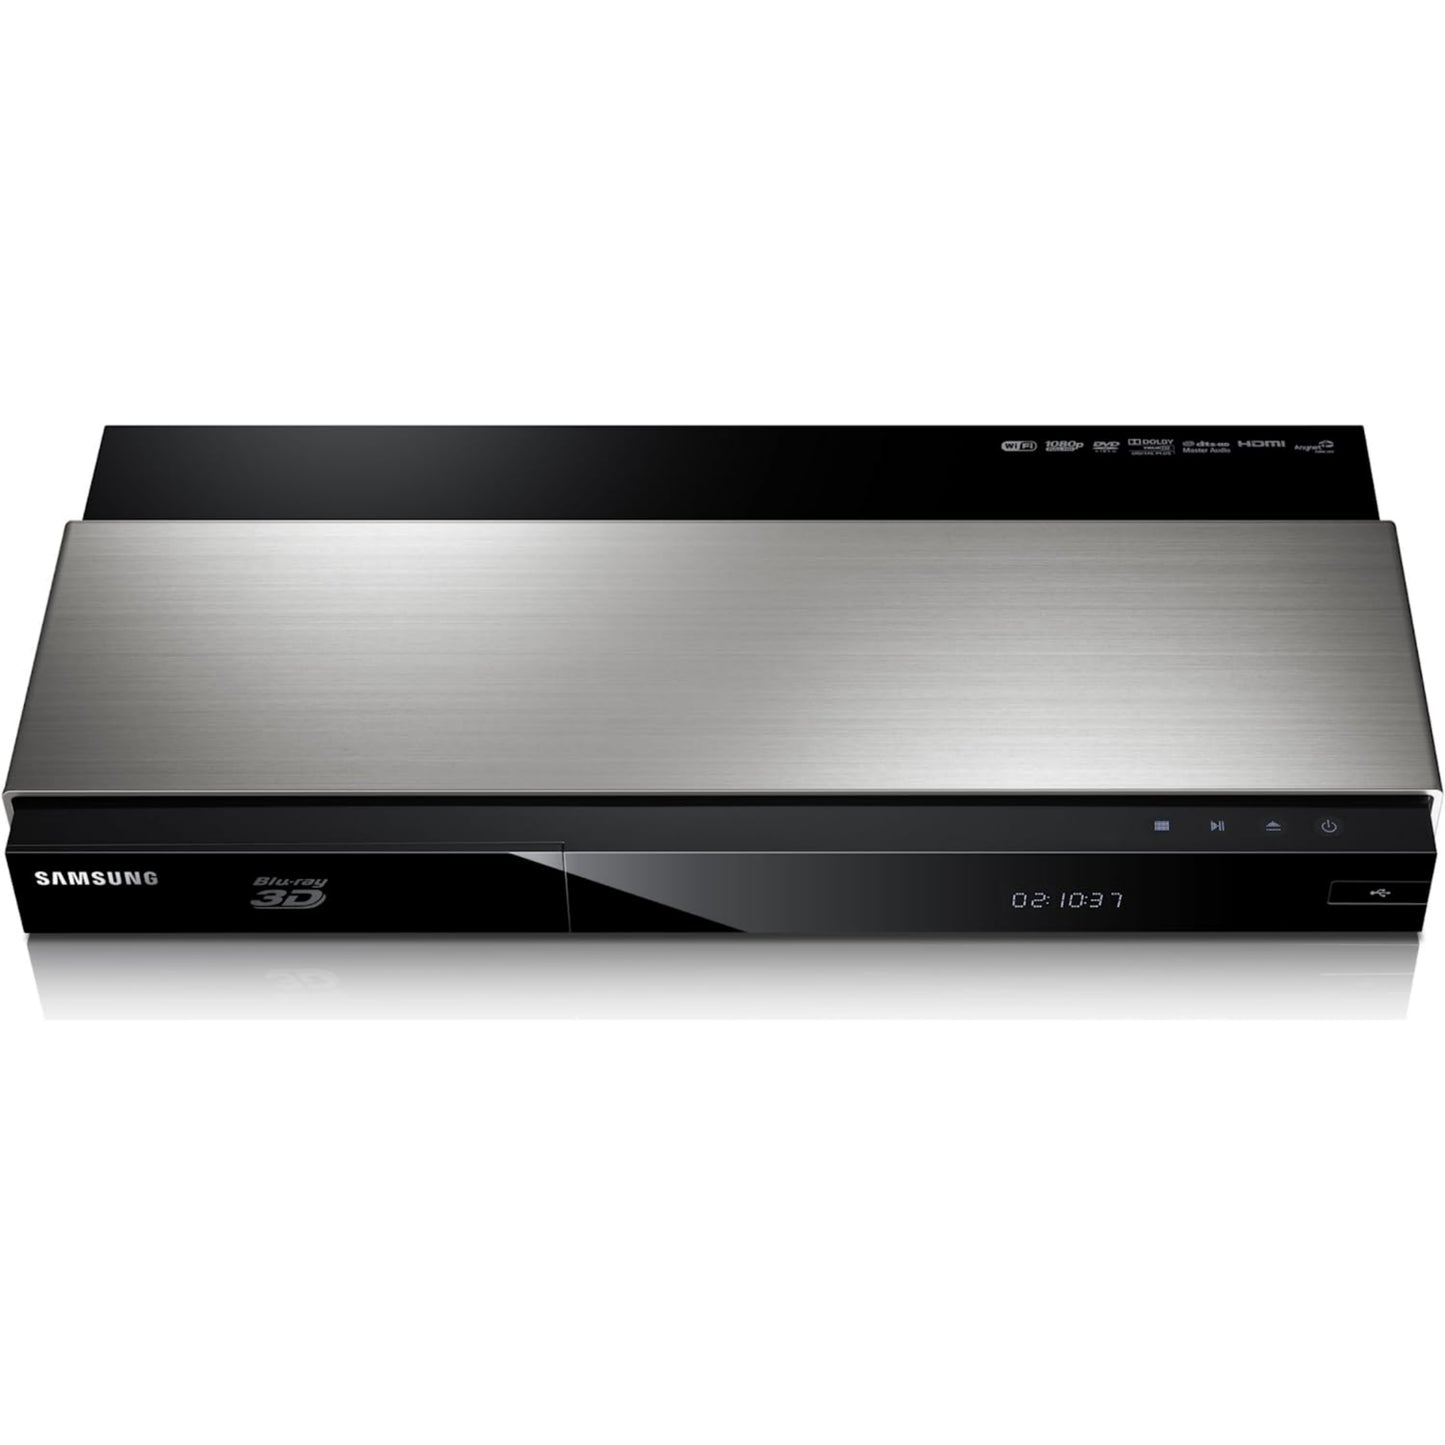 Samsung BD-F7500 WiFi Smart 4K Blu-ray 3D DVD Player + Screen Mirroring - Foreign Used